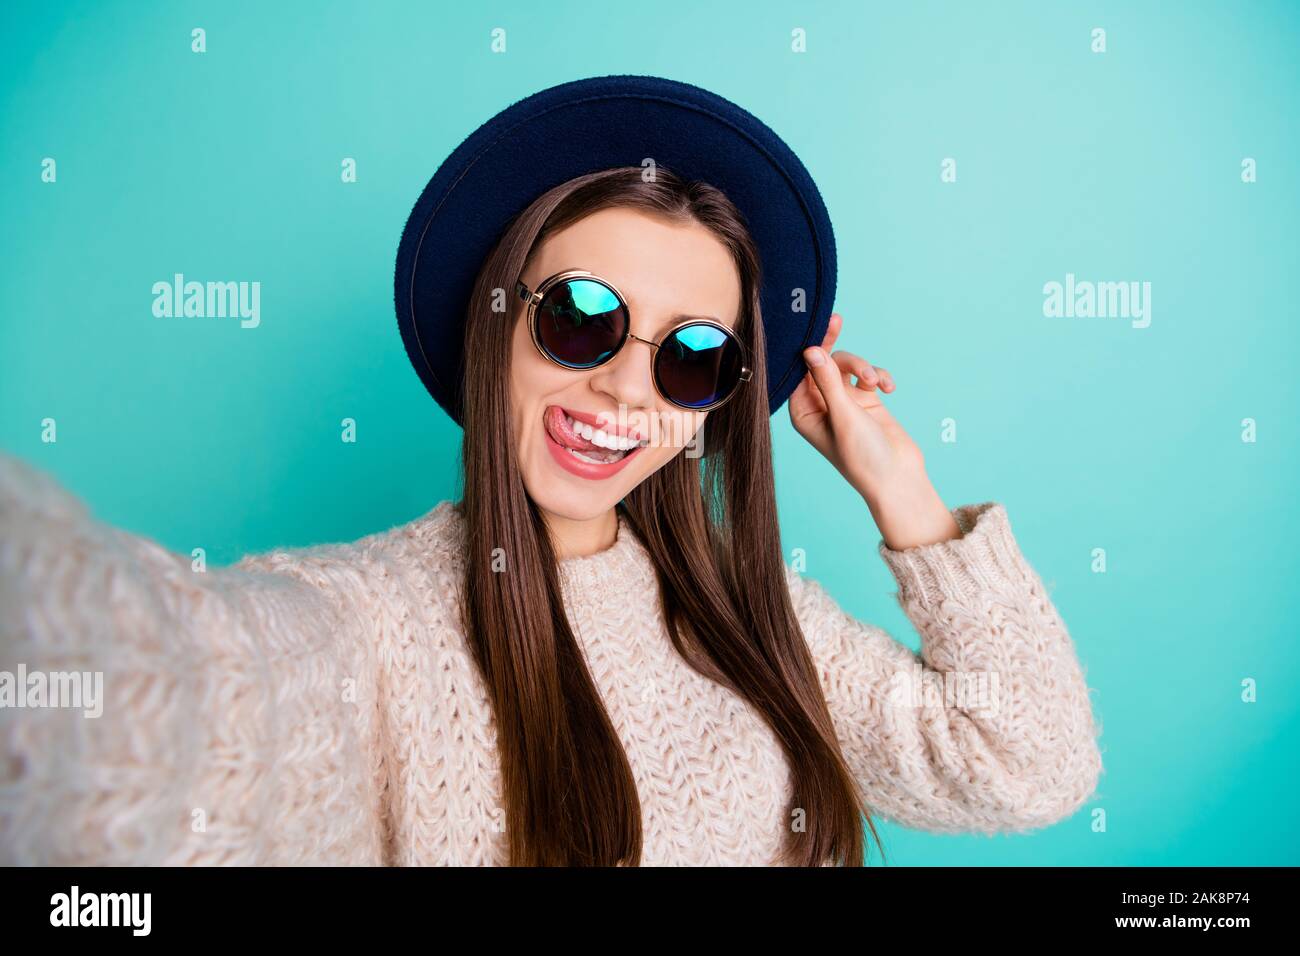 Close up photo of crazy foolish cute girl make self portrait blogging lick lips have fun wear knitted jumper isolated over teal turquoise color Stock Photo